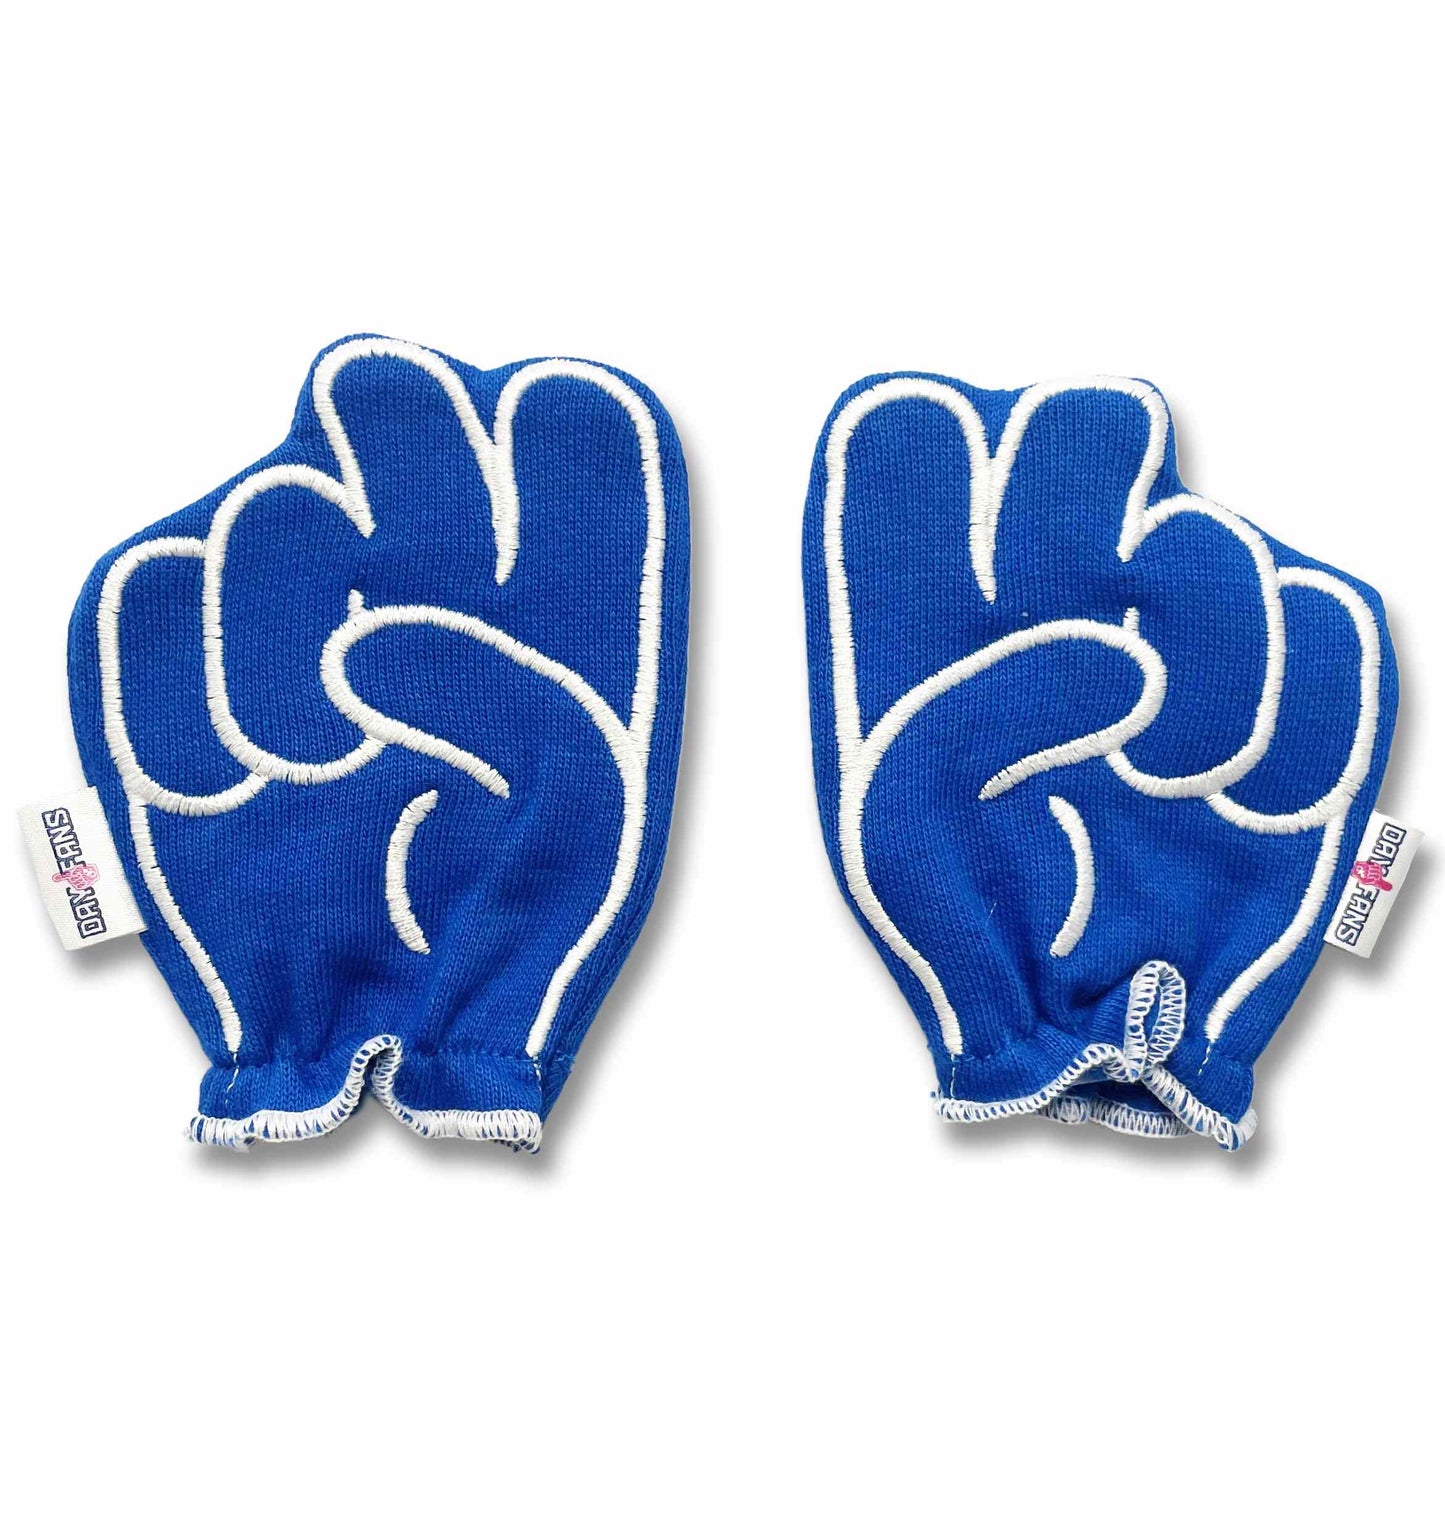 SMU Pony Up! FanMitts™